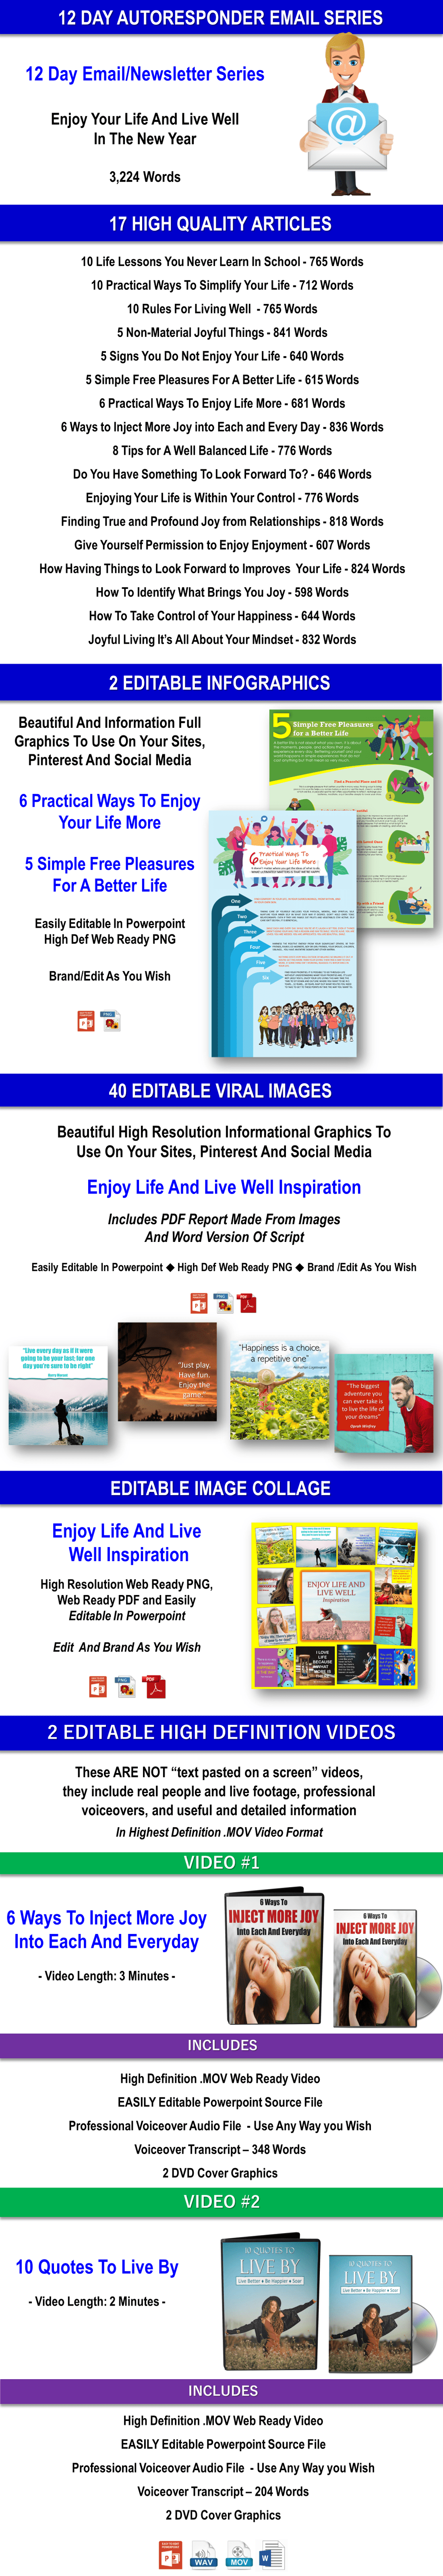 BE FIERCE AND FEARLESS CASE STUDIES AND MANTRAS Content Pack with PLR Rights